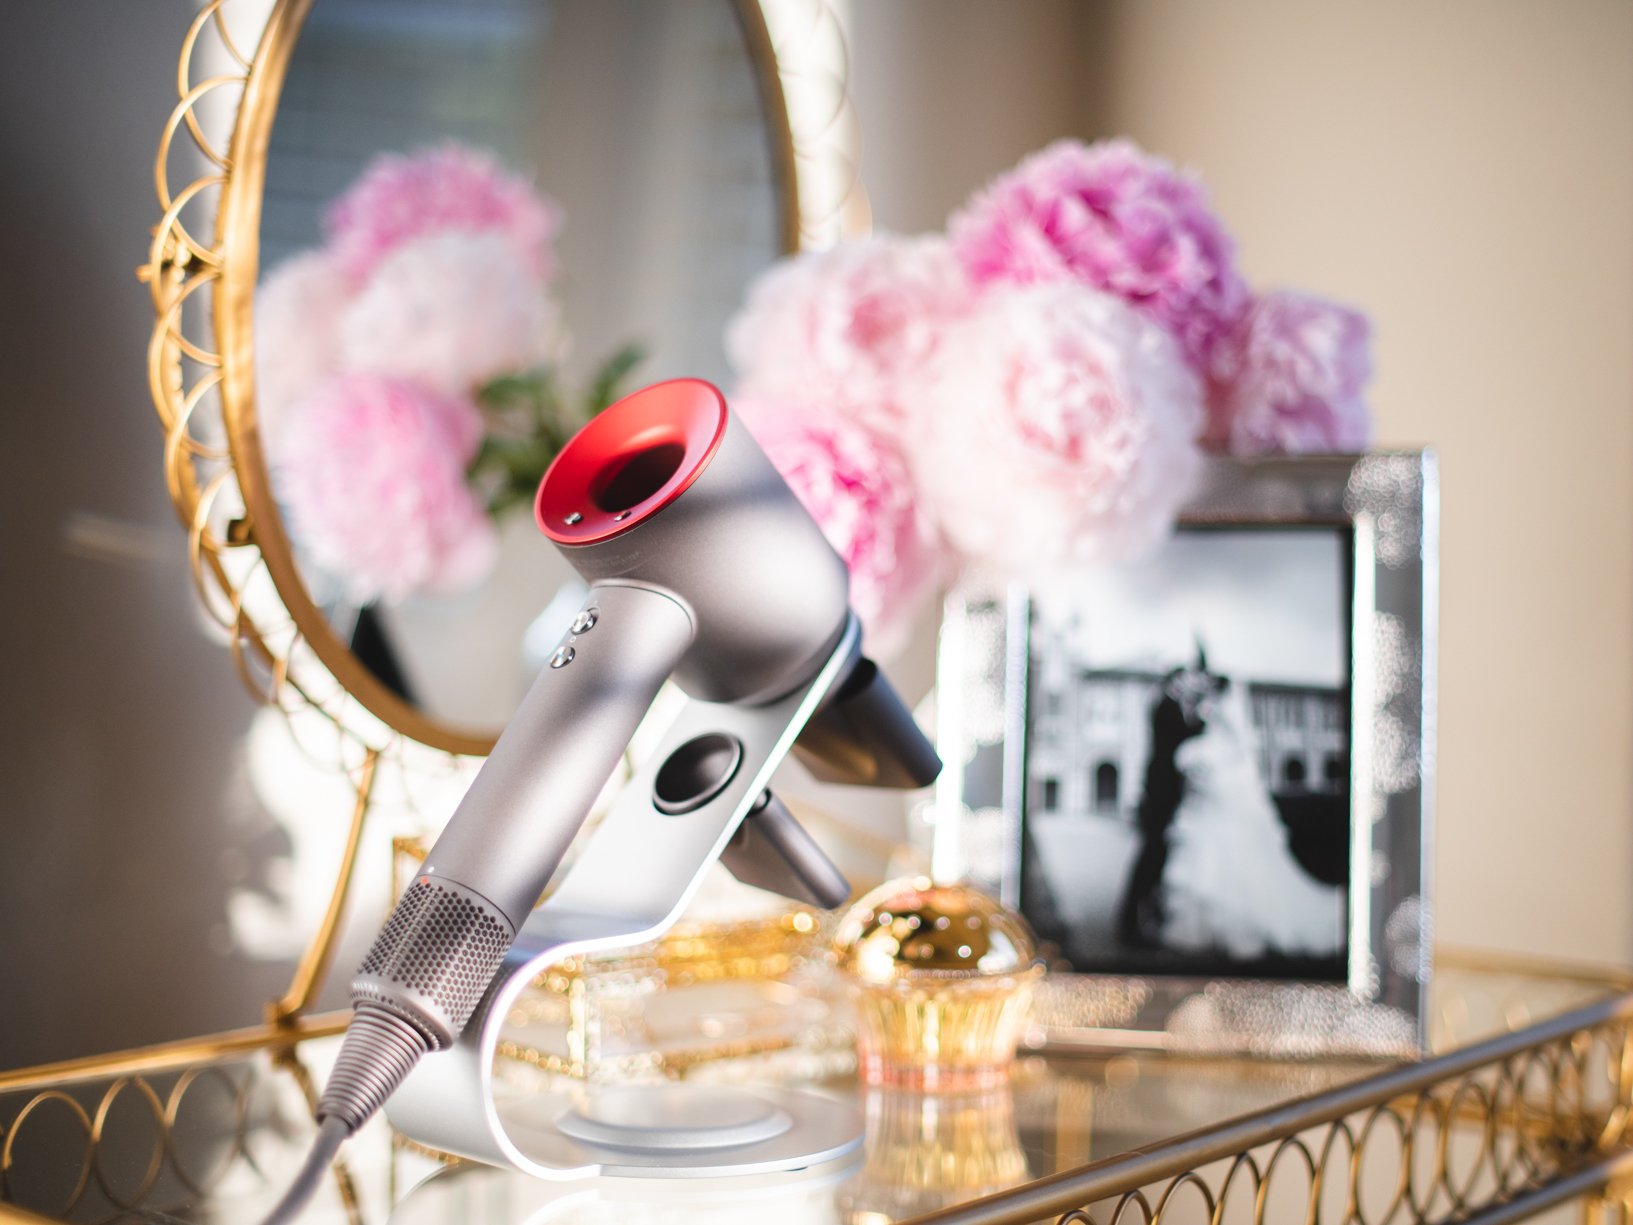 Dyson Hairdryer with a stand on vanity table